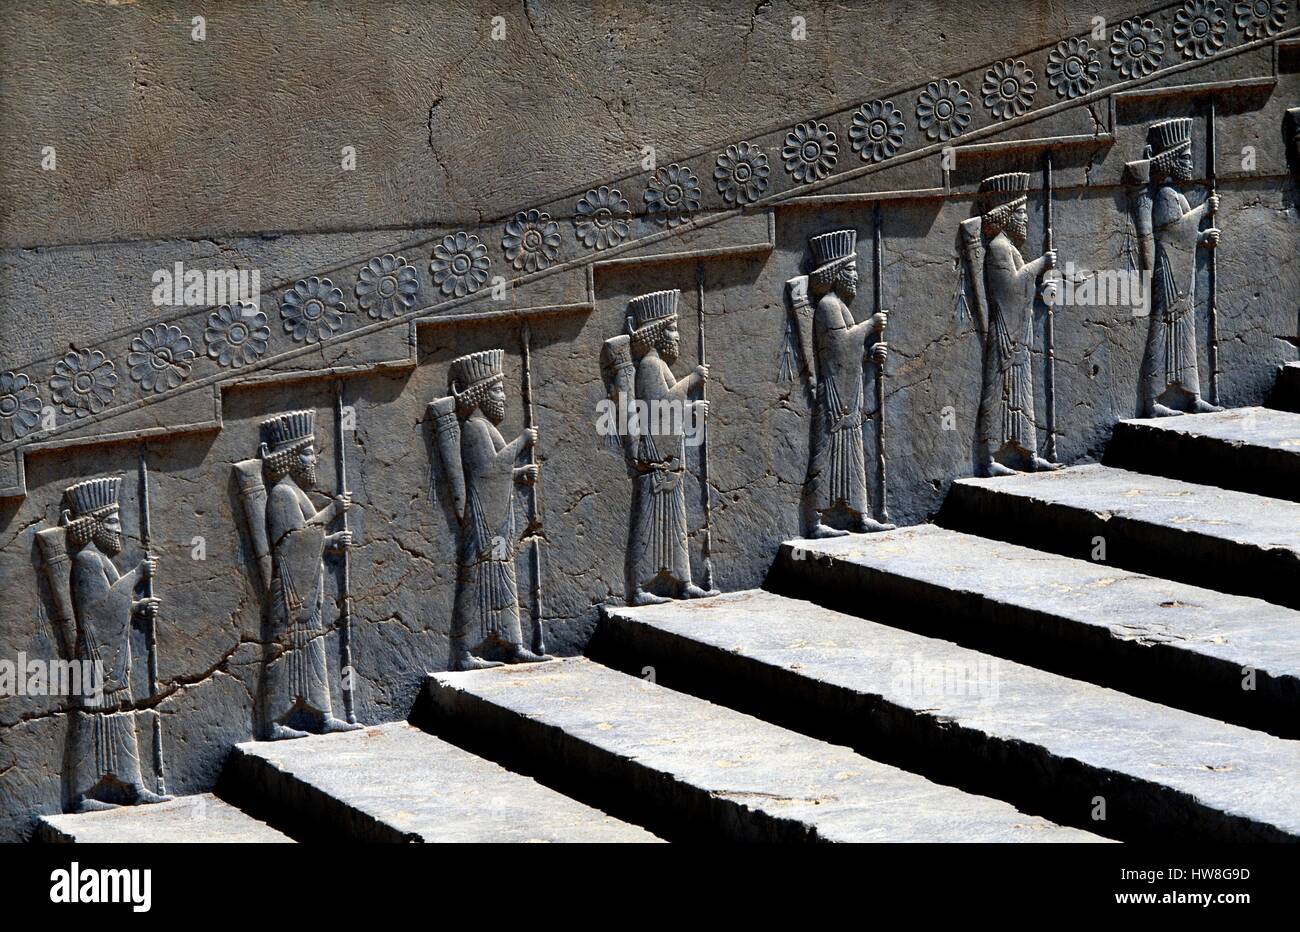 Iran, Fars Province, Persepolis, the Eastern stairway of the Apadana shows  a procession of people bringing gifts to the Achaemenid king, in 512 BC,  Darius the Great began the construction to serve